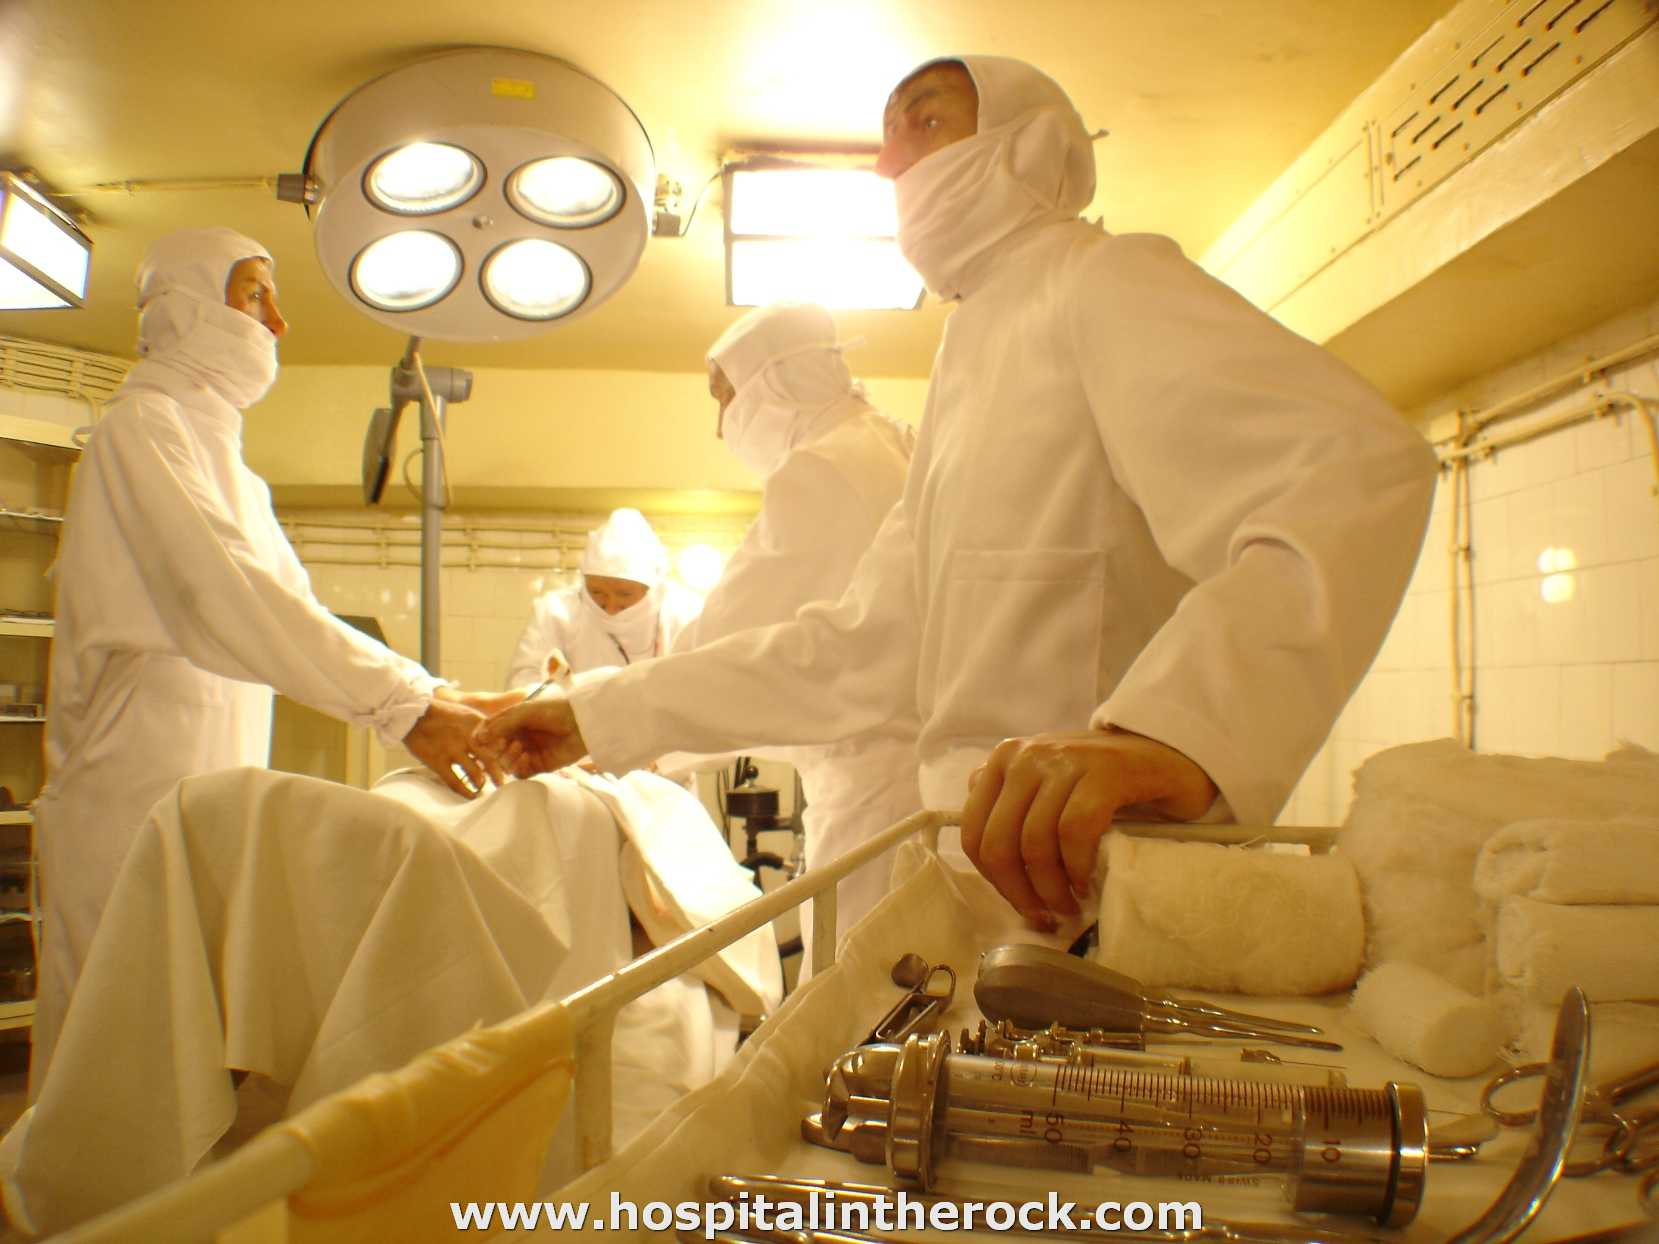 Hospital in the rock 13